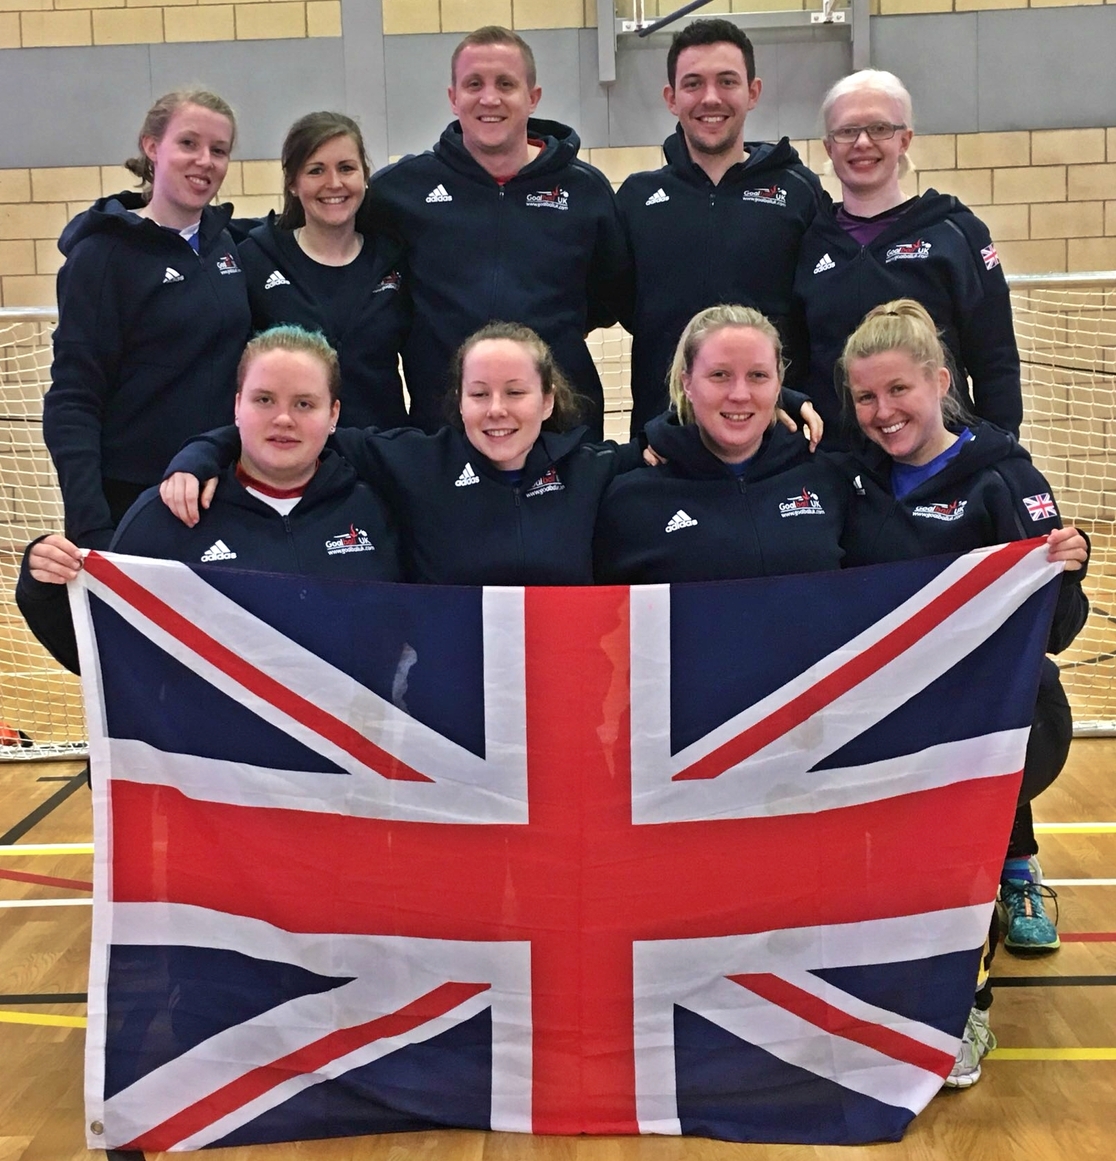 The GB Women's team from 2017 with Sarah Leiter on the top right